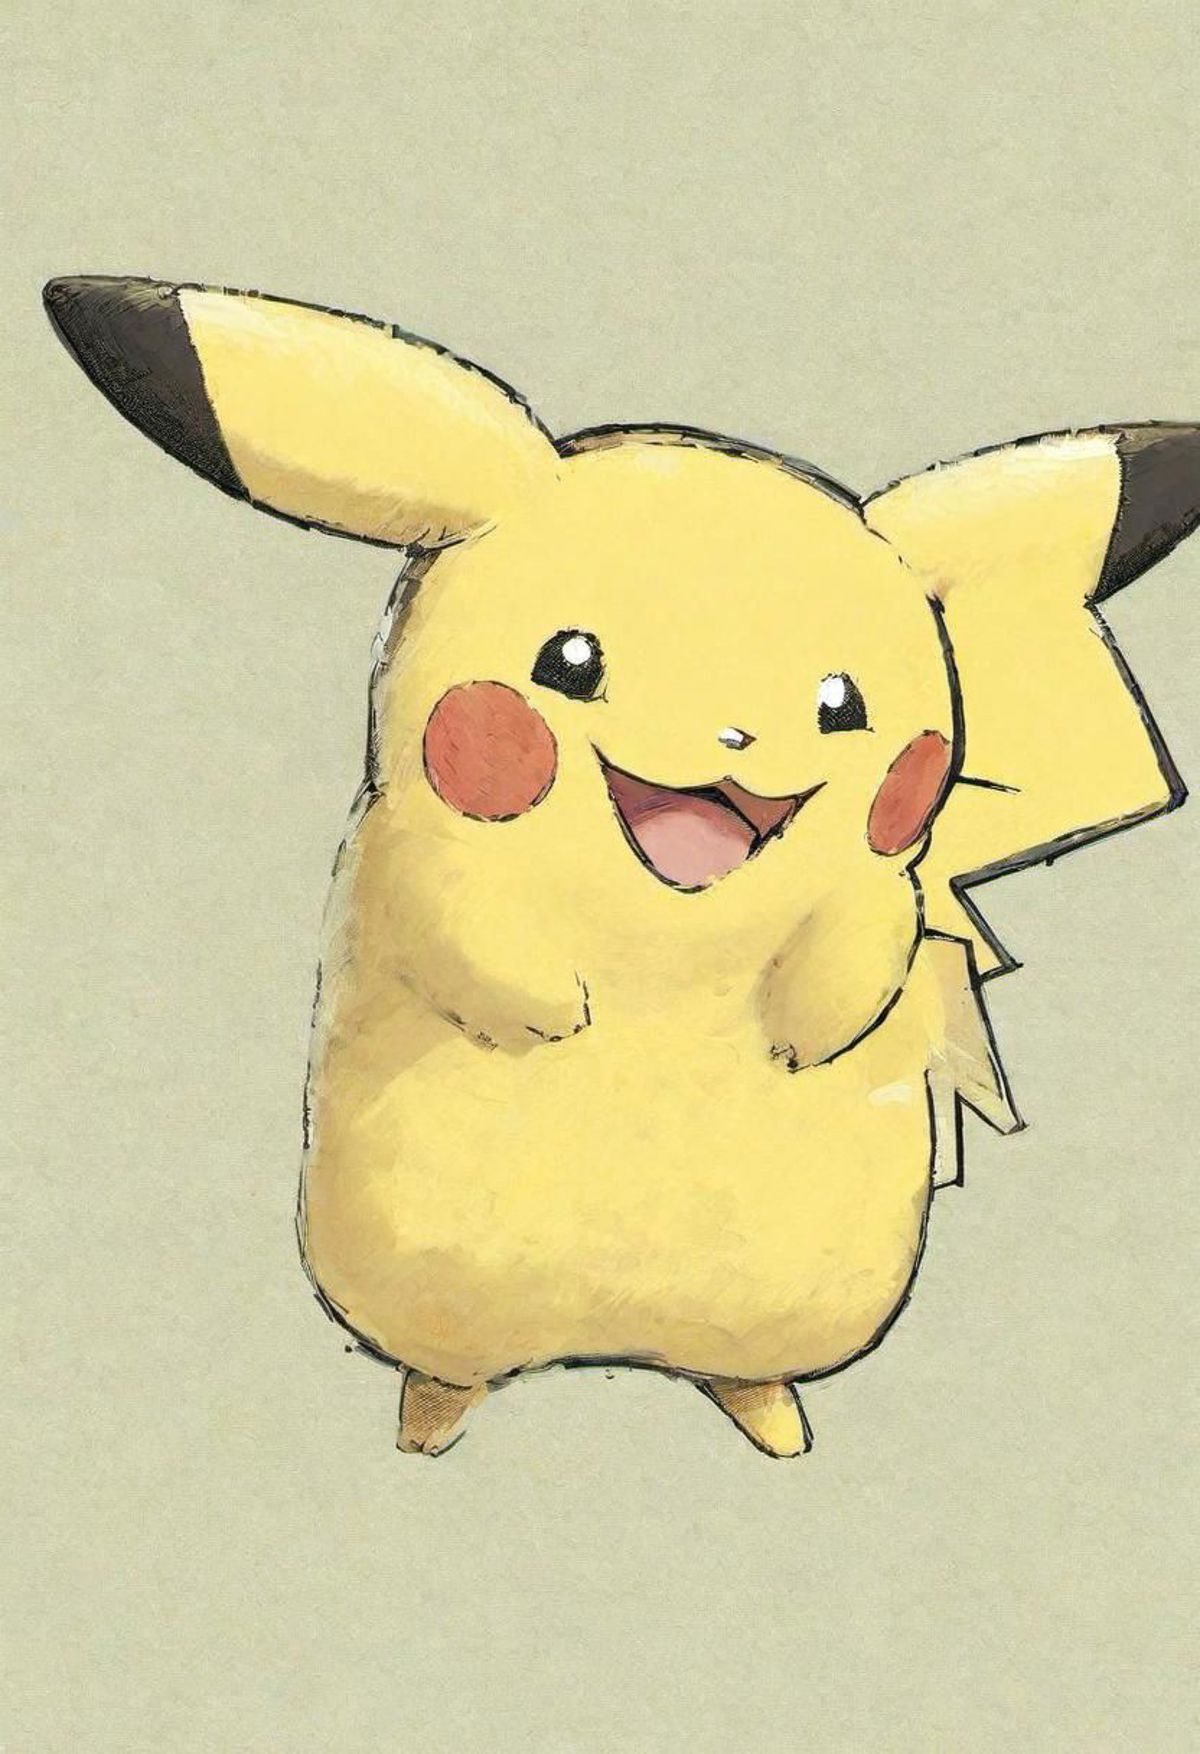 Happy Pikachu with Big Smile and Large Ears - Pokemon Cartoon Character